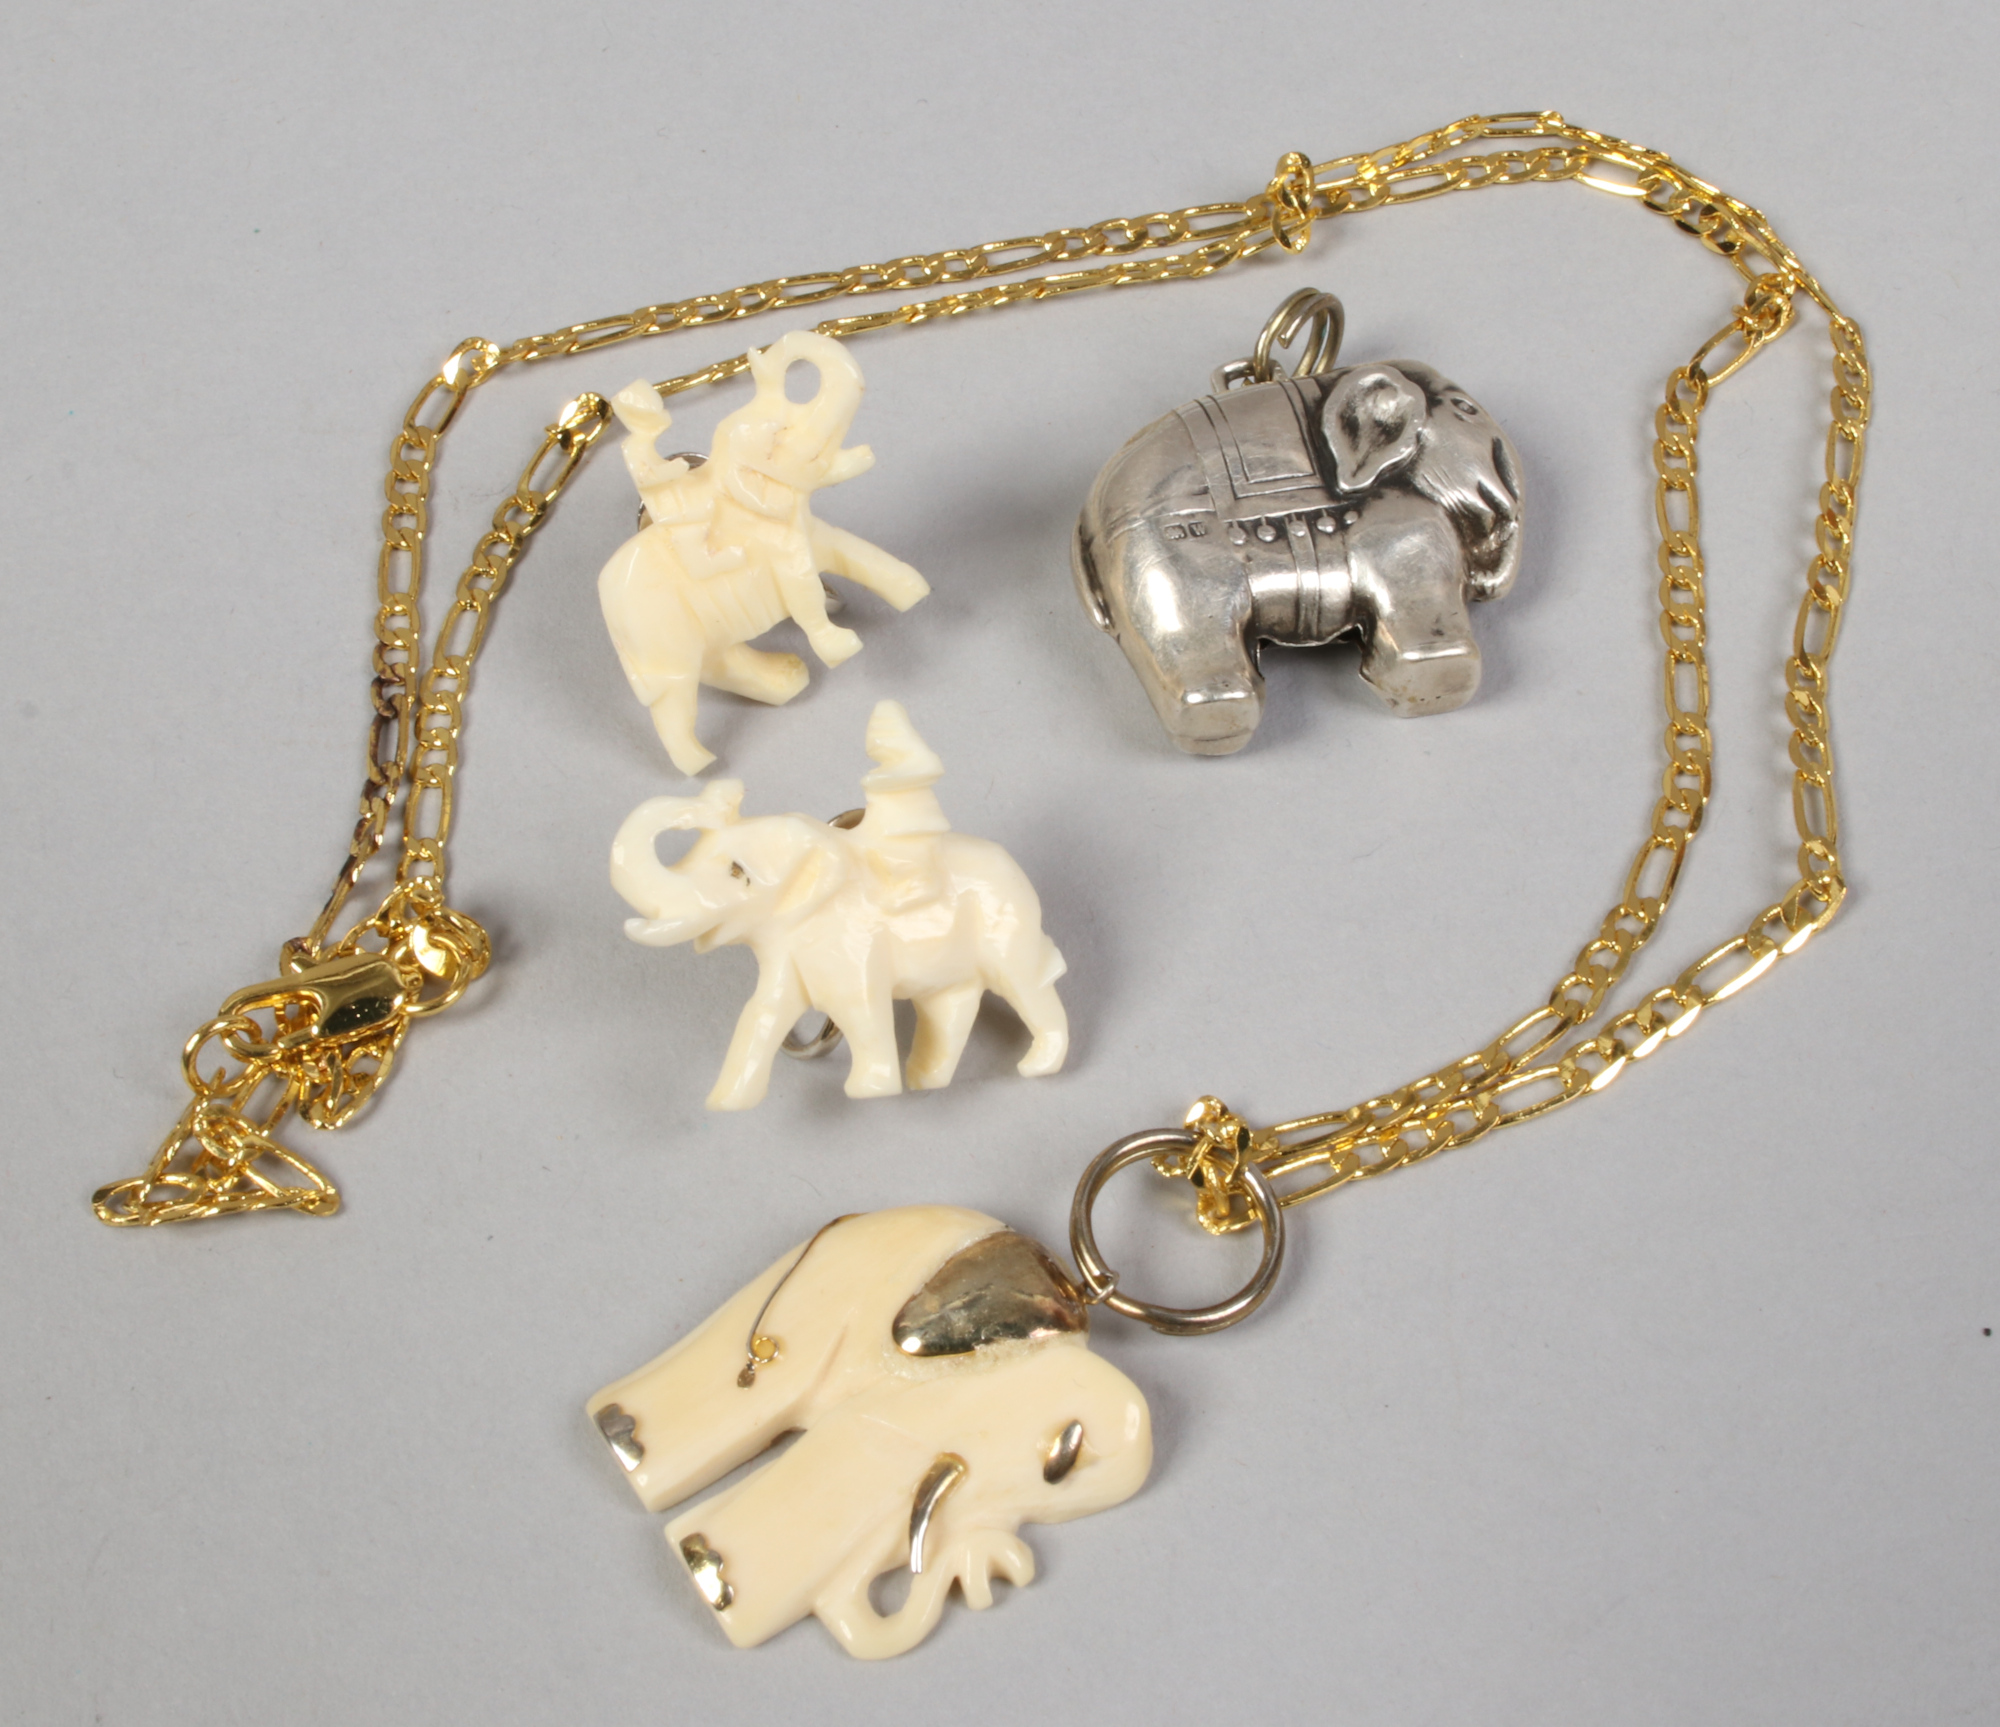 A pair of carved bone elephant earrings and similar pendants.